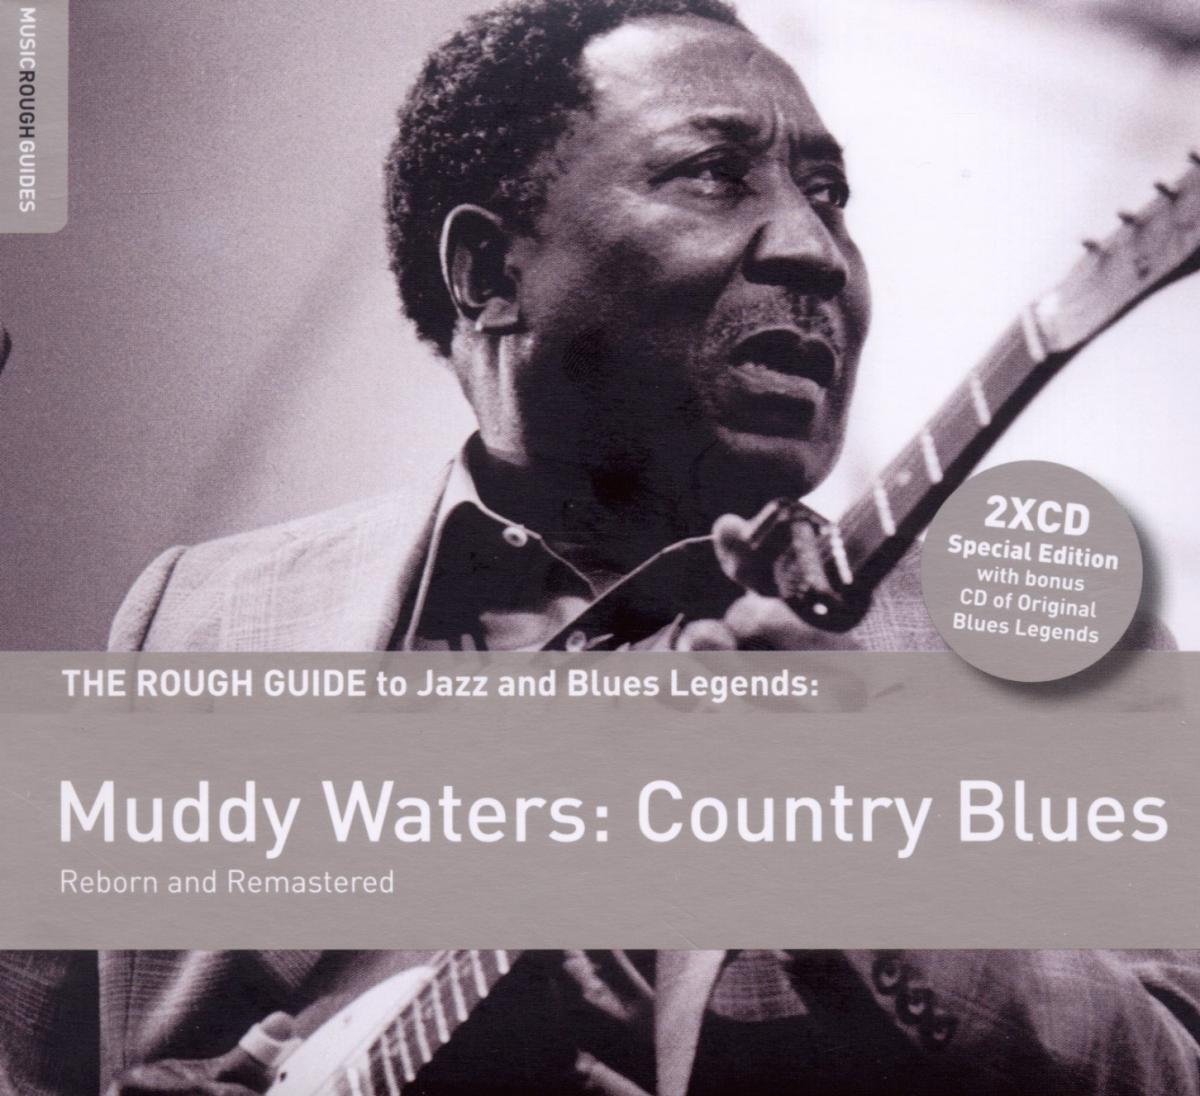 CD Shop - WATERS MUDDY ROUGH GUIDE TO MUDDY WATERS: COUNTRY BLUES